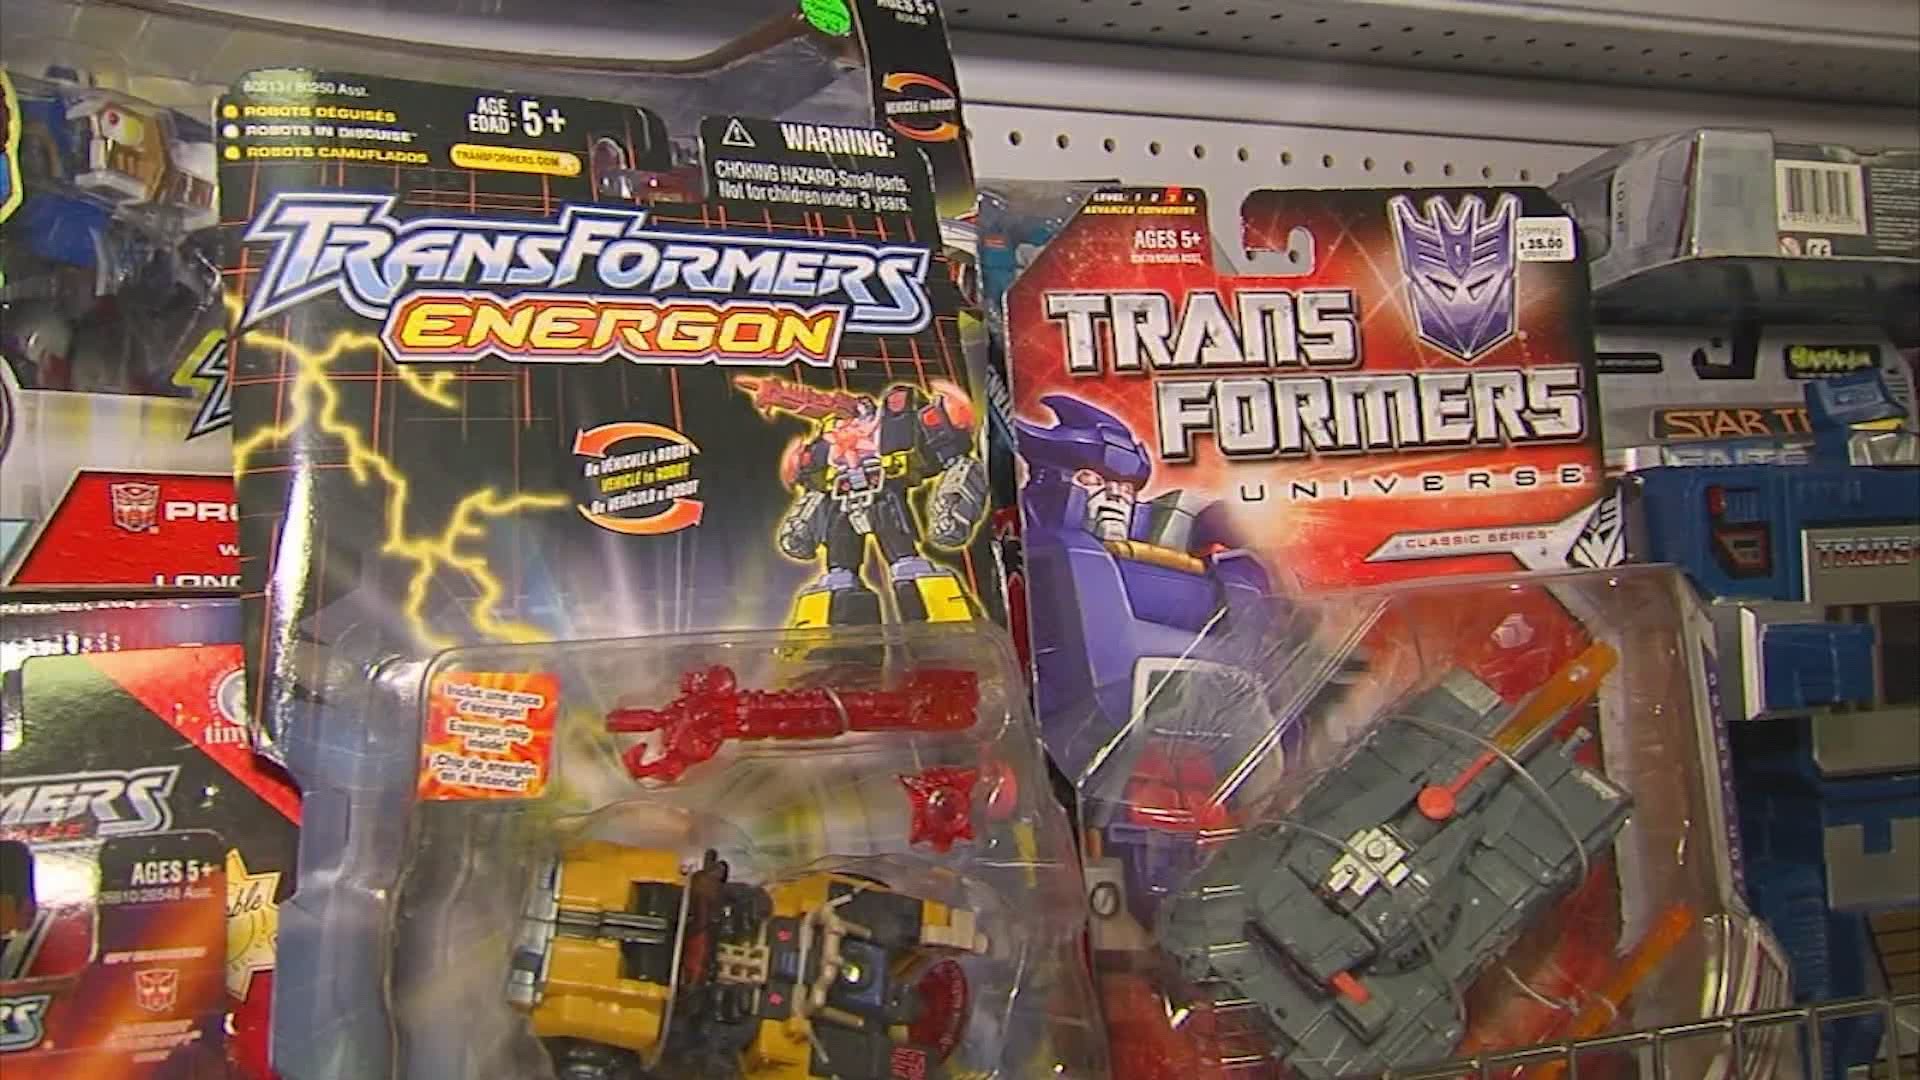 Many old toys, especially those from the 80s and earlier, and trading cards are soaring in value this year.